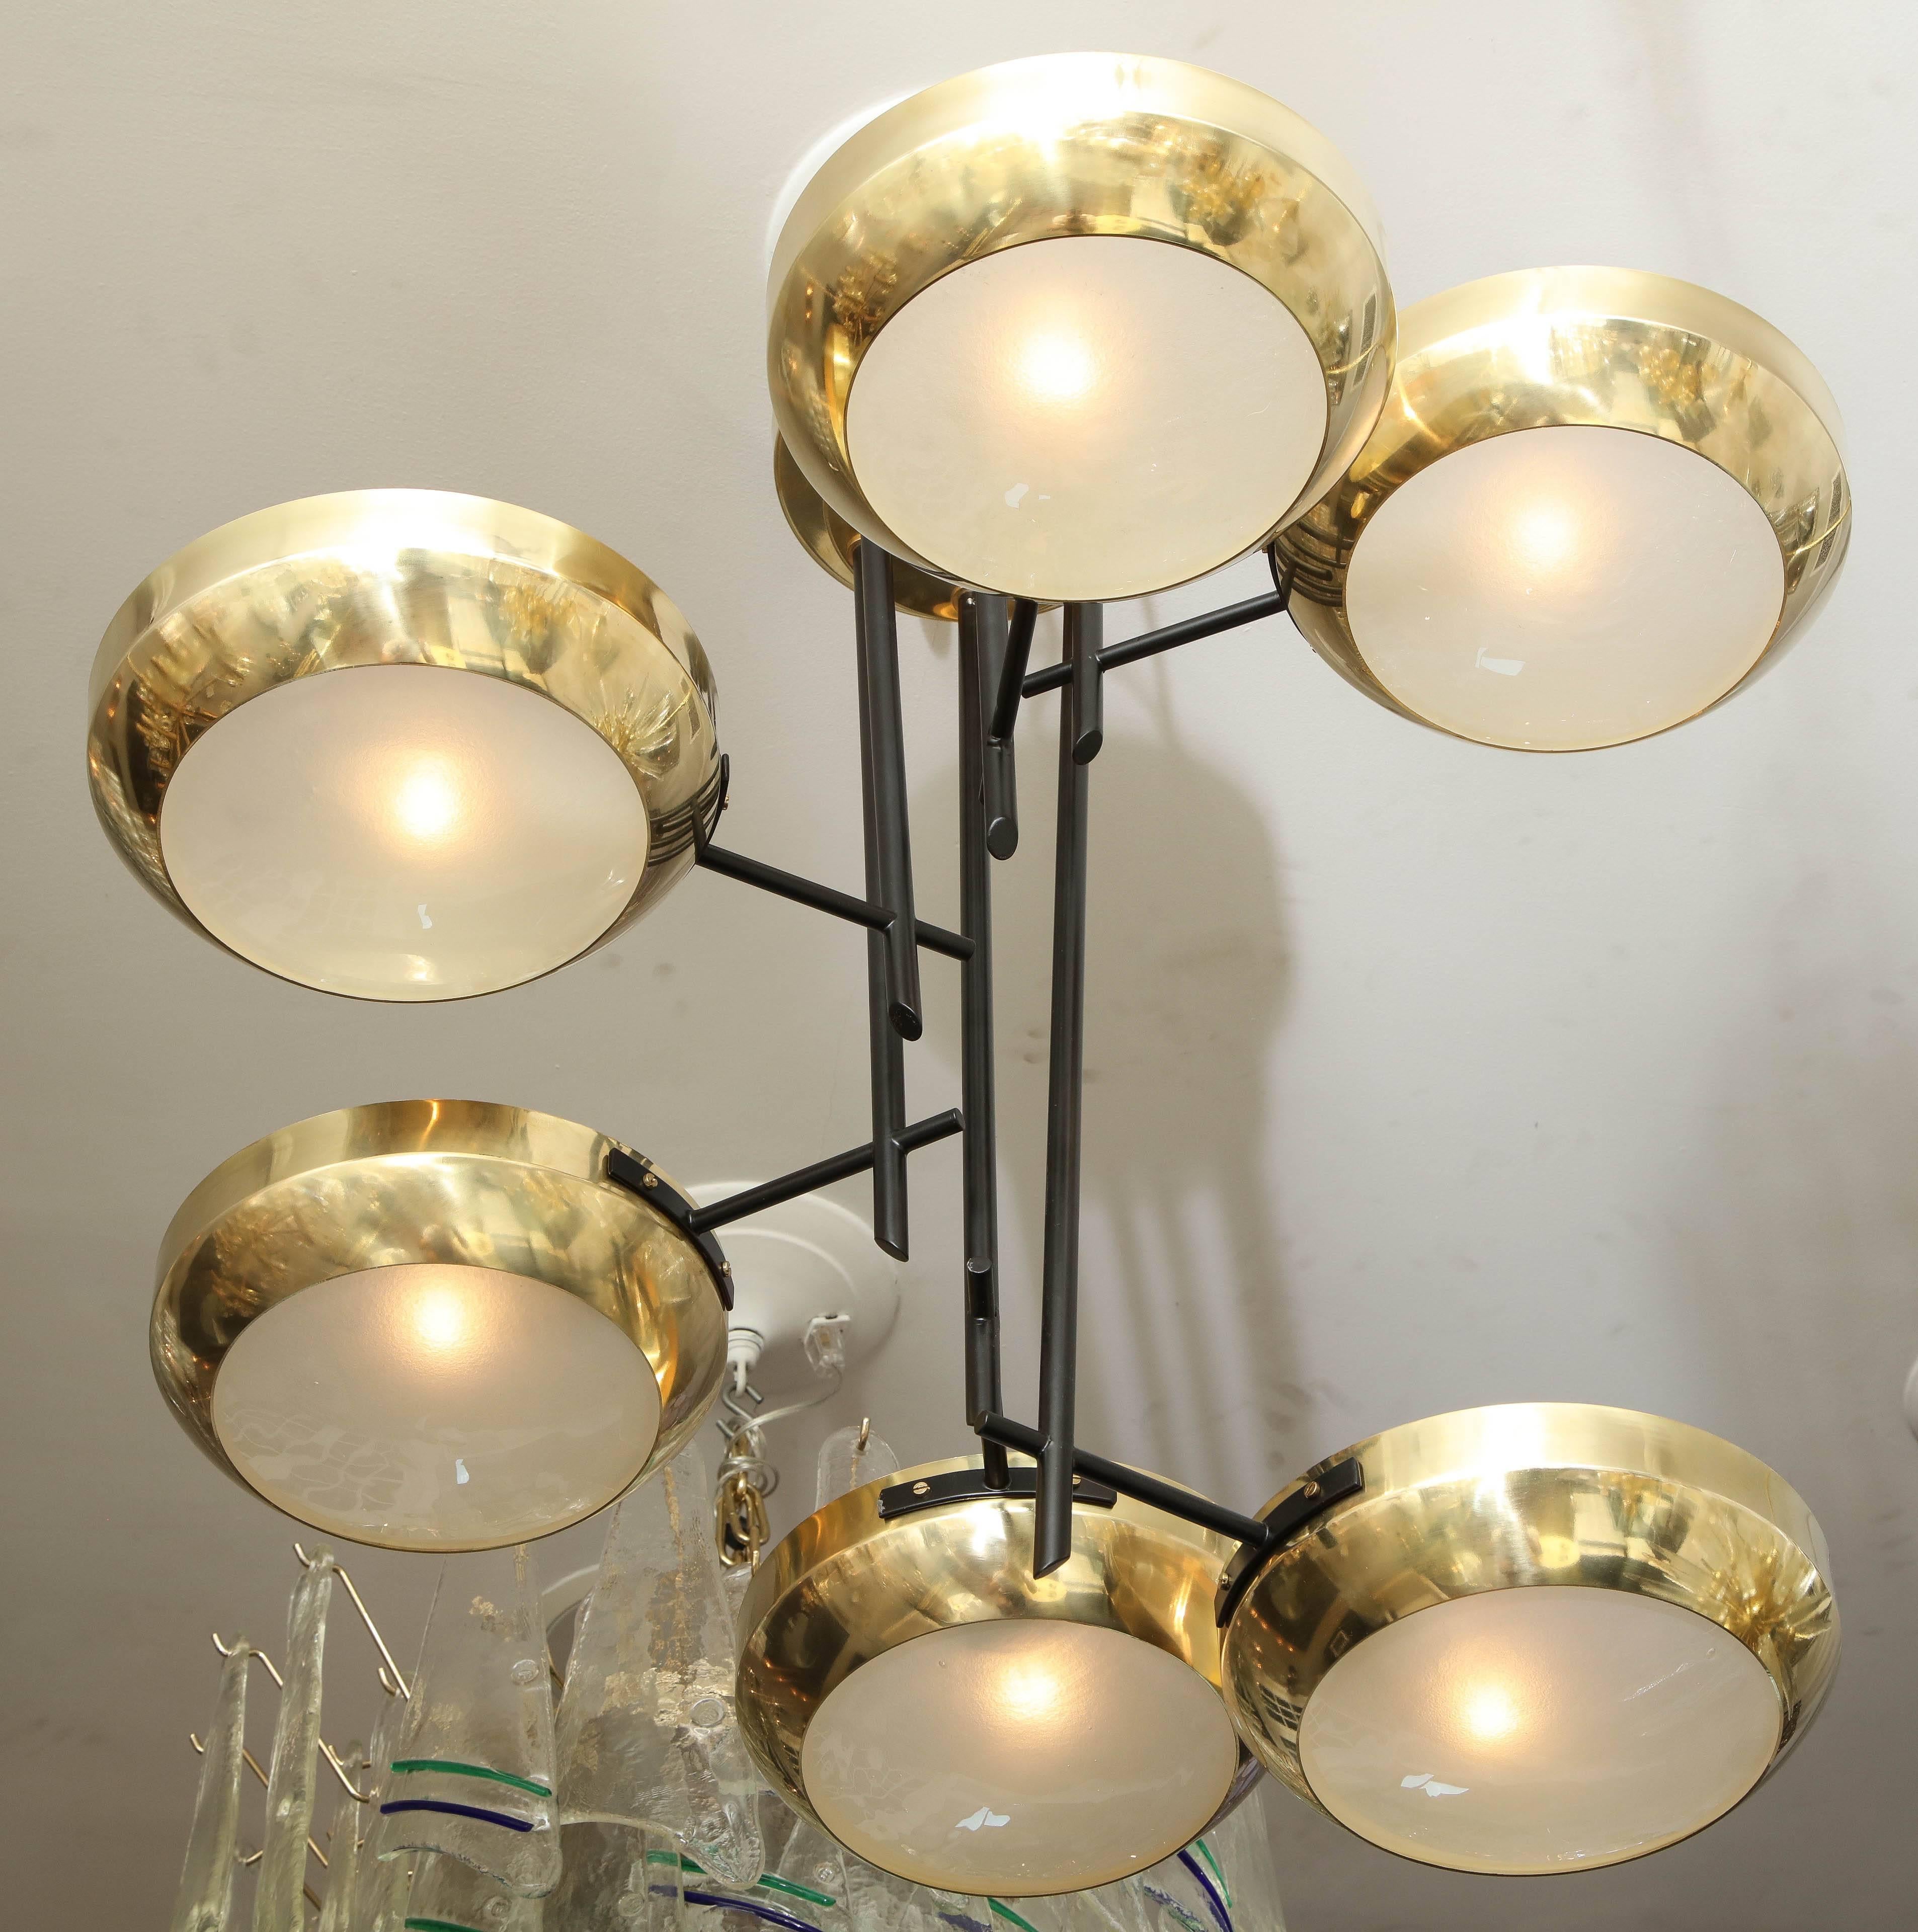 Six-arm ceiling light in the manner of Stilnovo. This is a floor model chandelier that is available as is for immediate purchase. It is in a like-new condition with minimum wear.